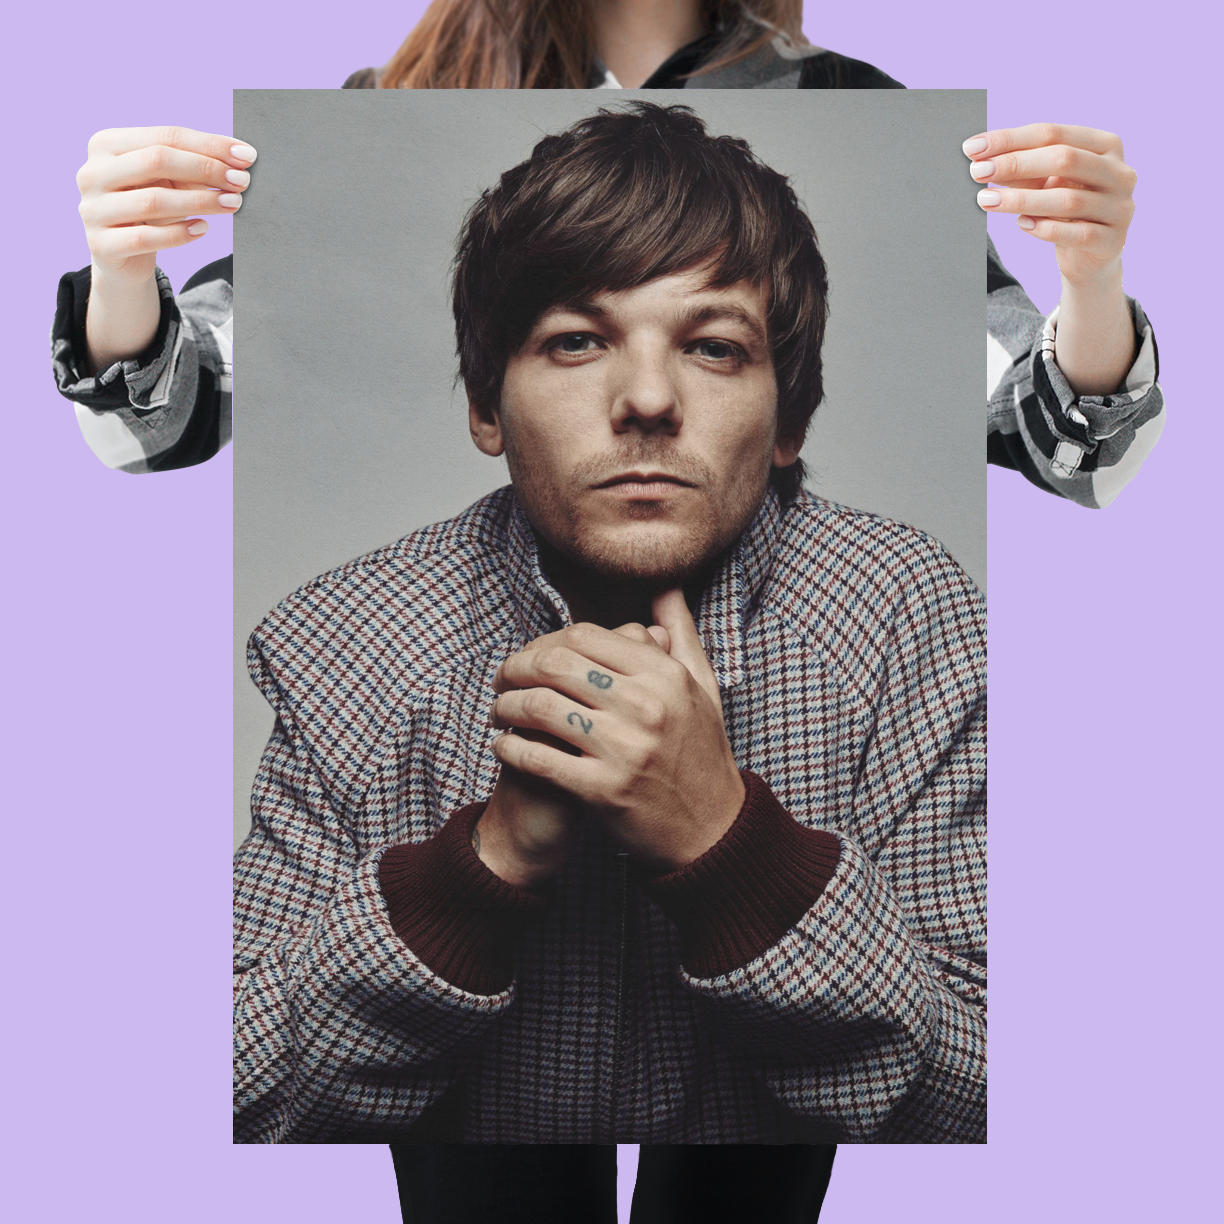 Louis Tomlinson (Walls) Album Cover Poster - Lost Posters